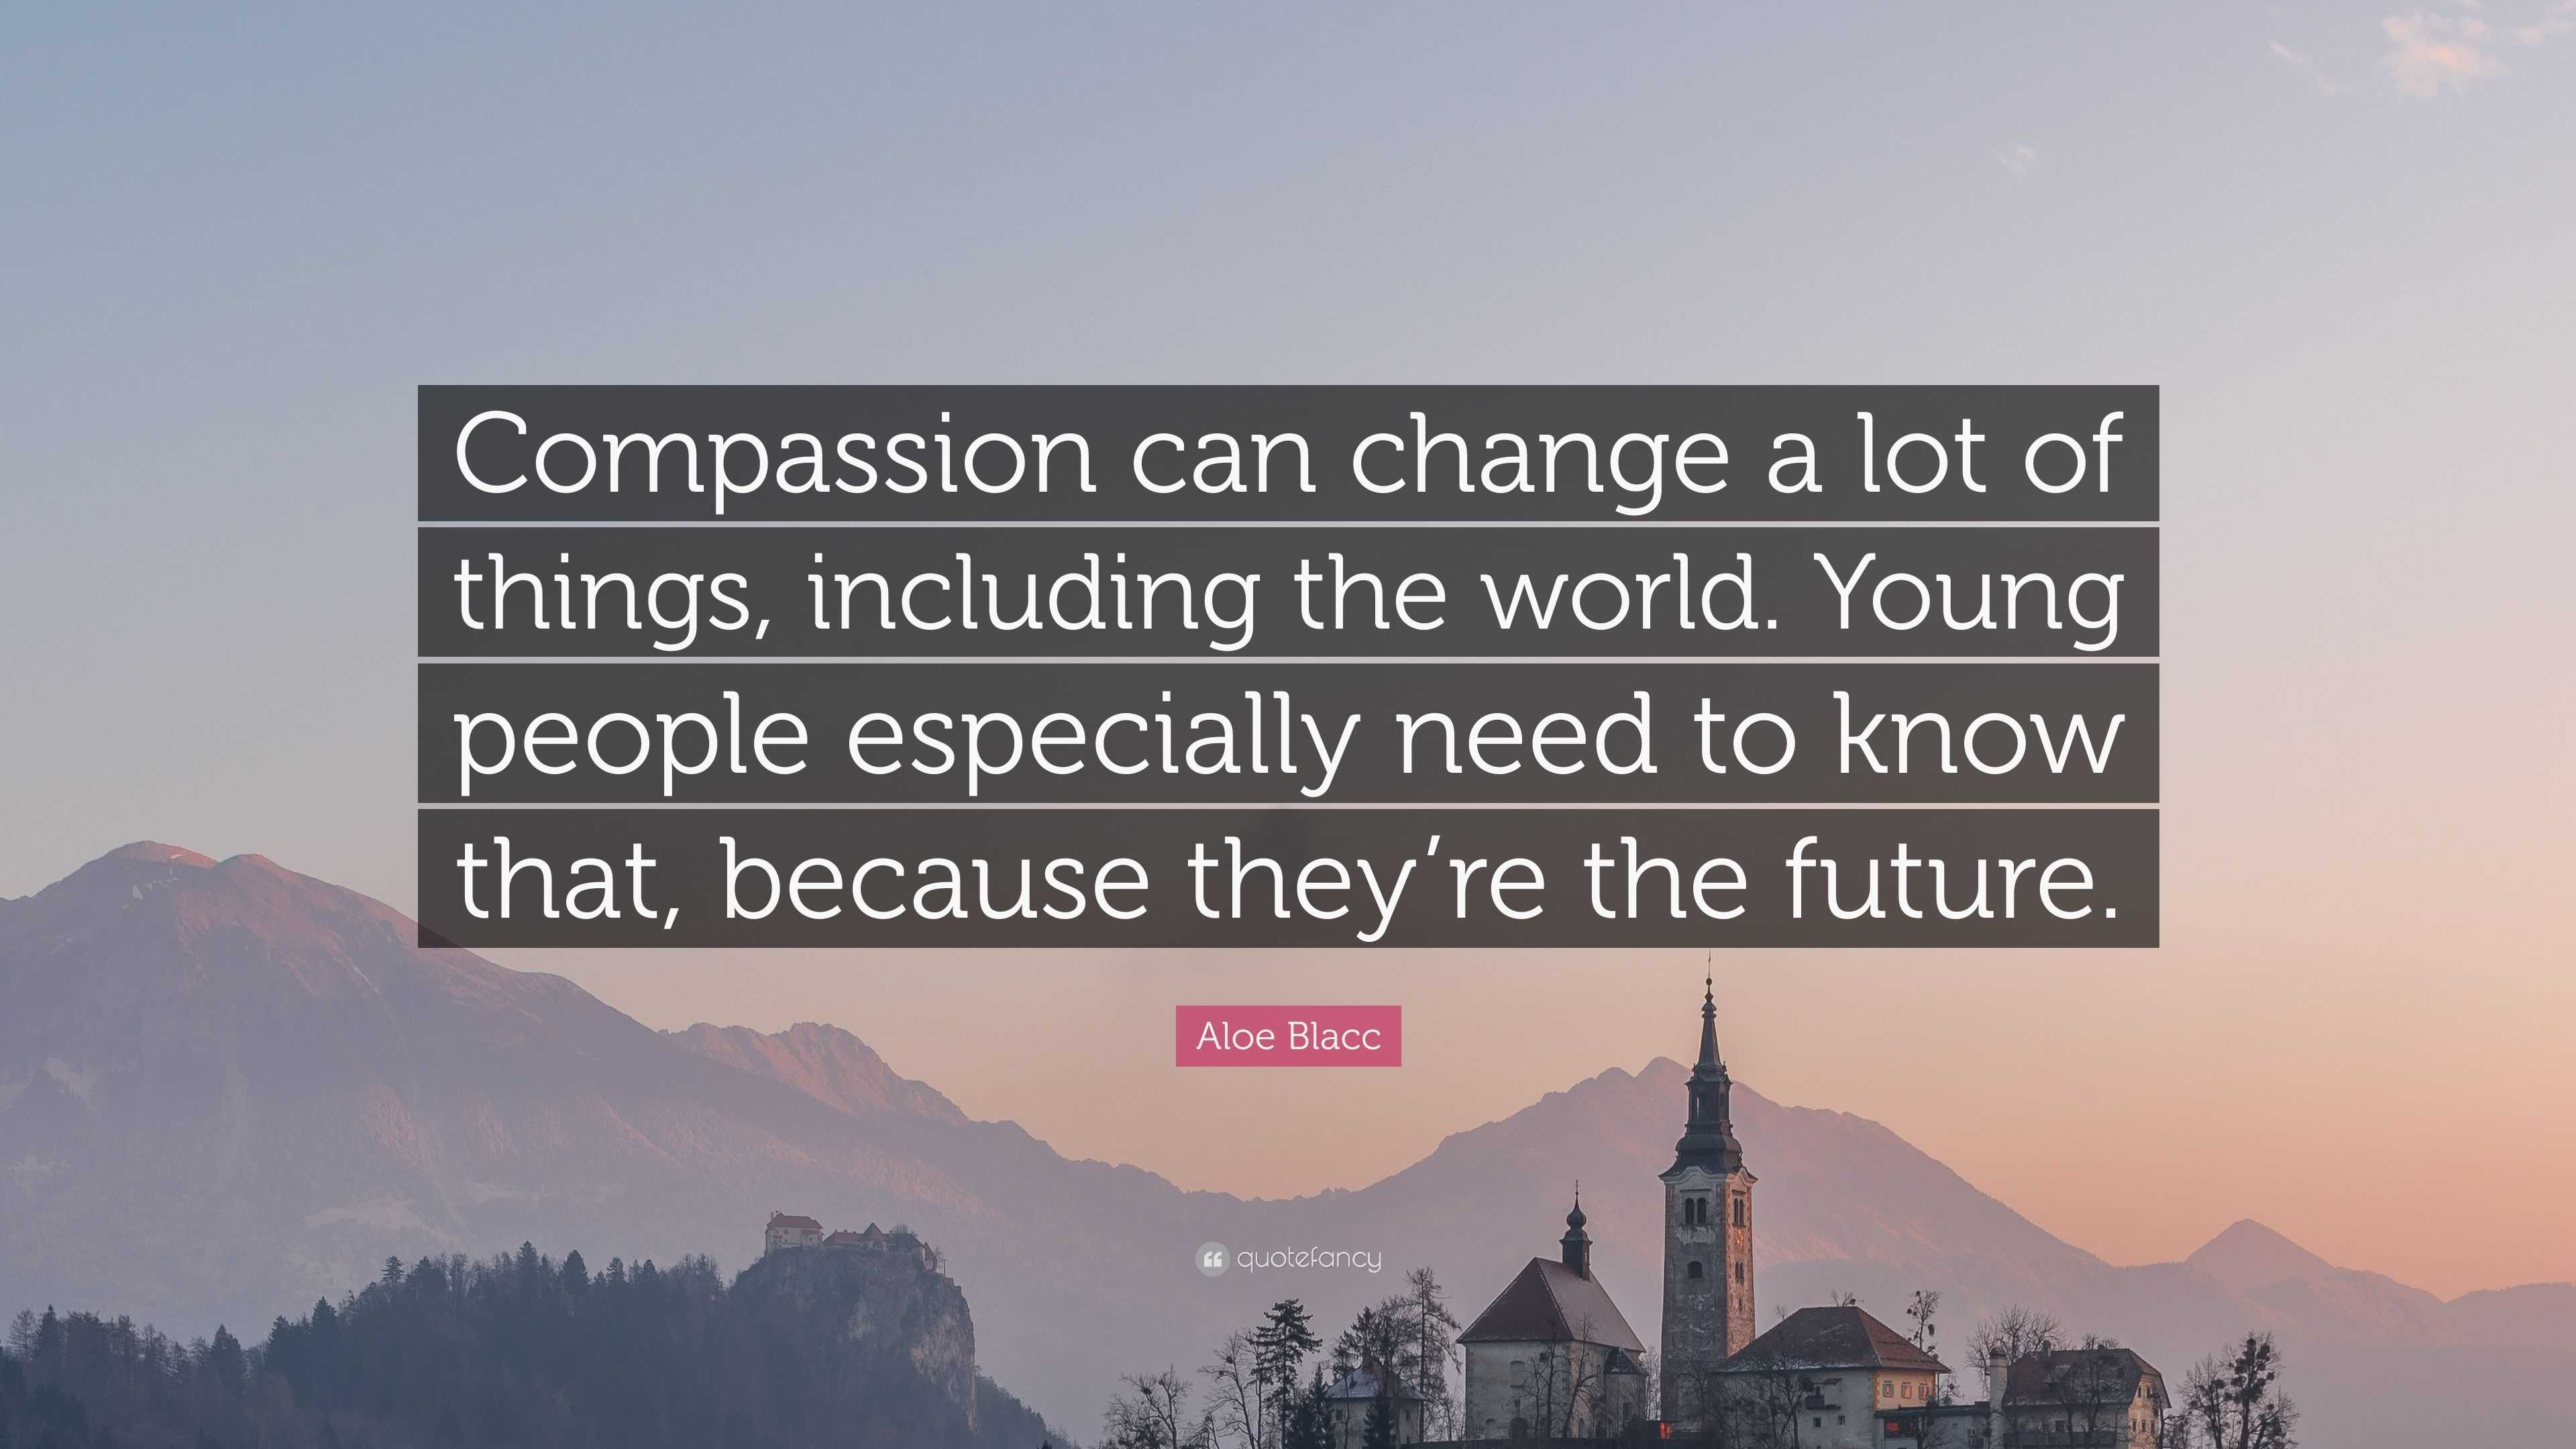 Aloe Blacc Quote: “Compassion can change a lot of things